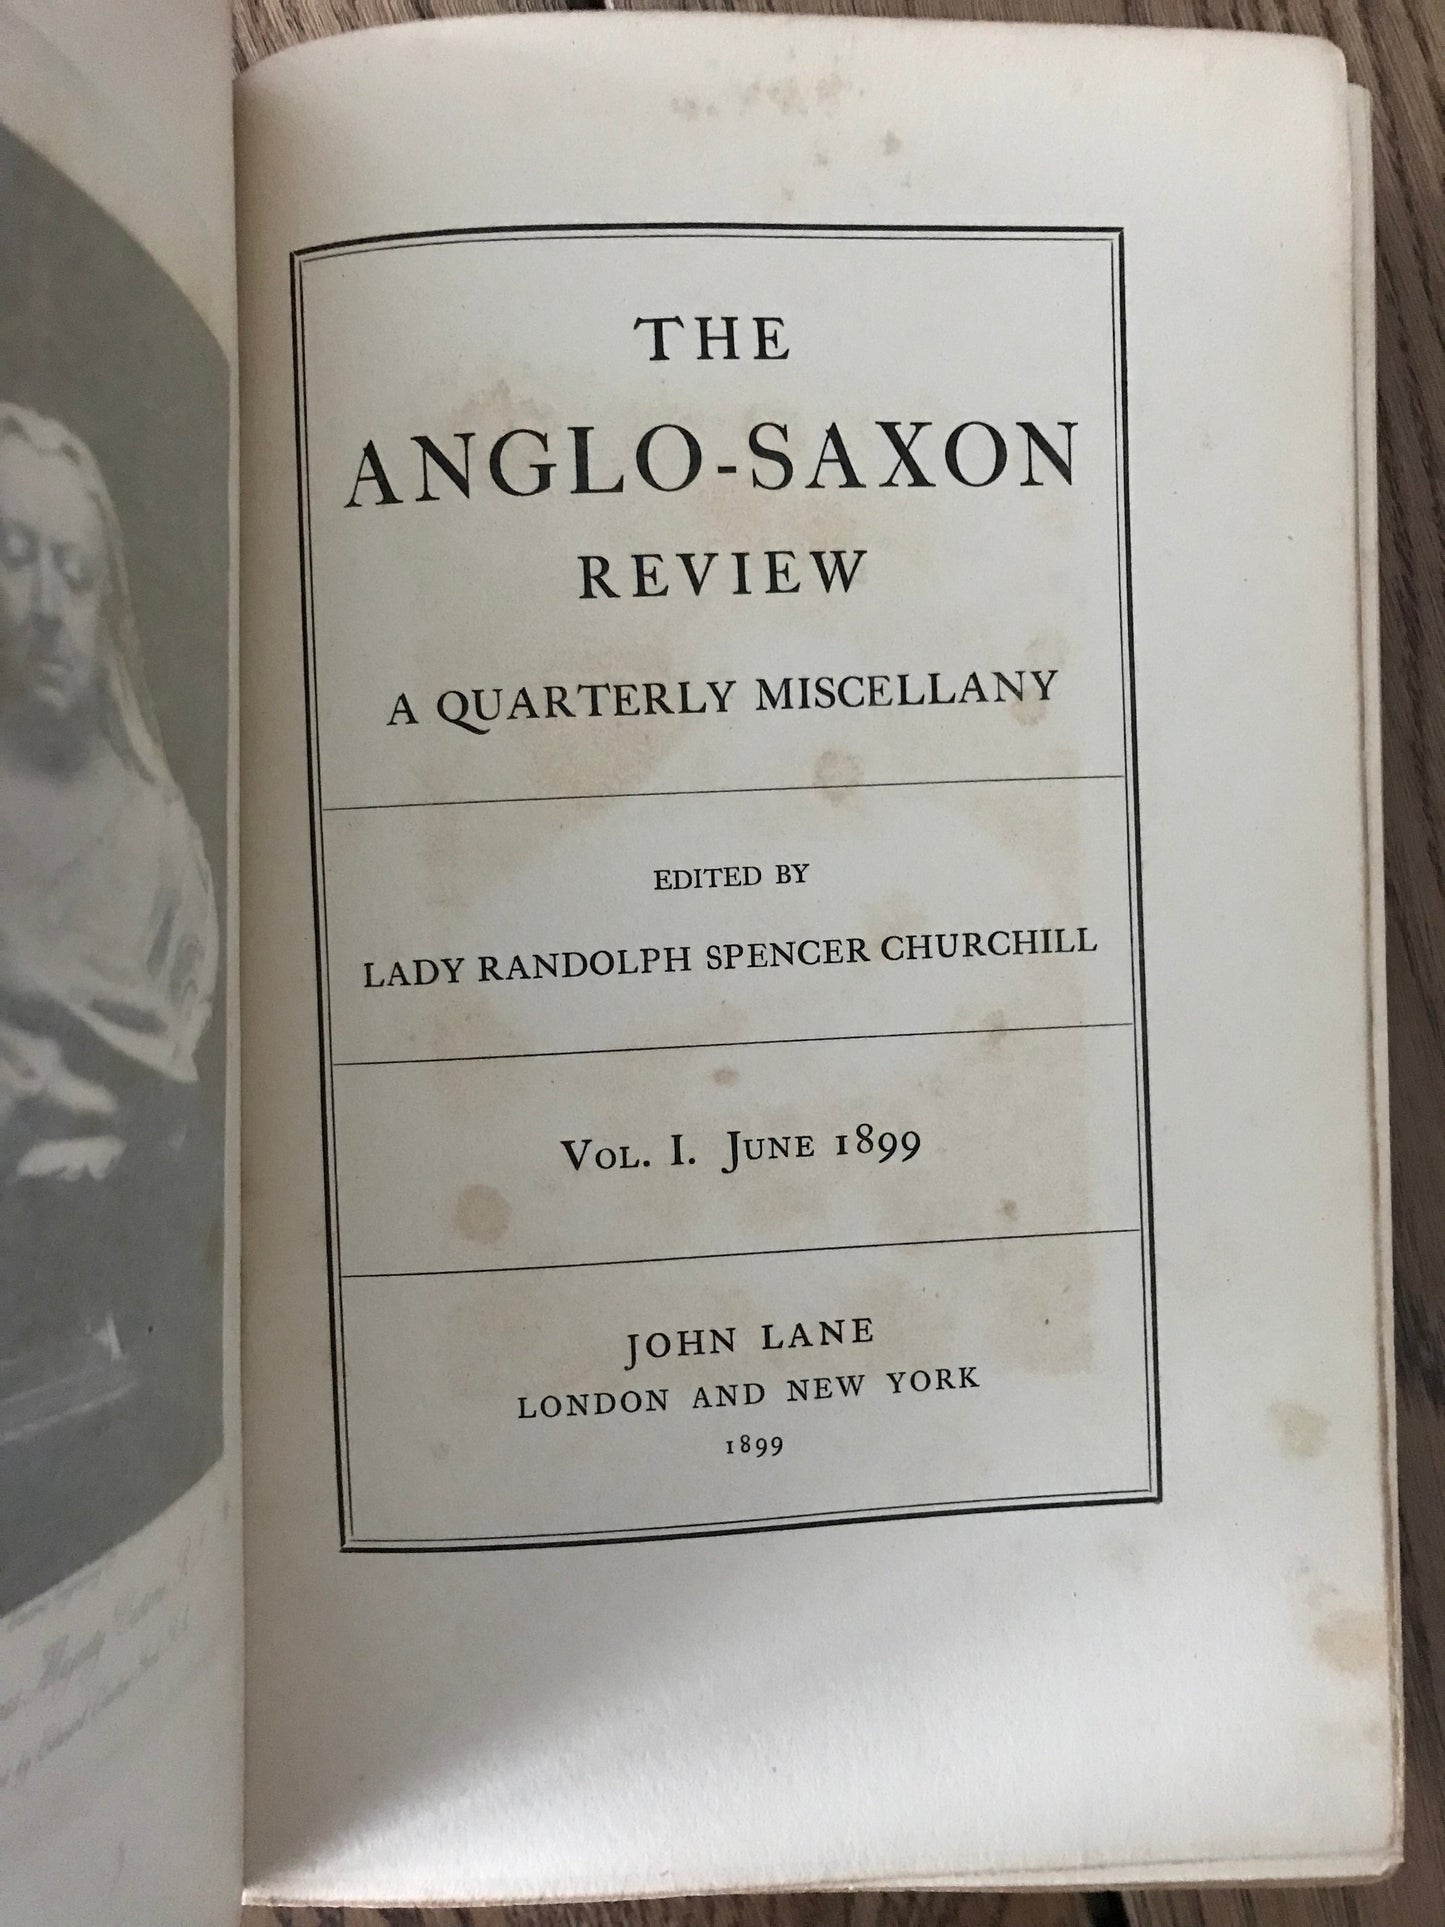 THE ANGLO-SAXON REVIEW - A QUARTERLY MISCELLANY -  EDITOR :  LADY RANDOLF SPENCER CHURCHILL BooksCardsNBikes